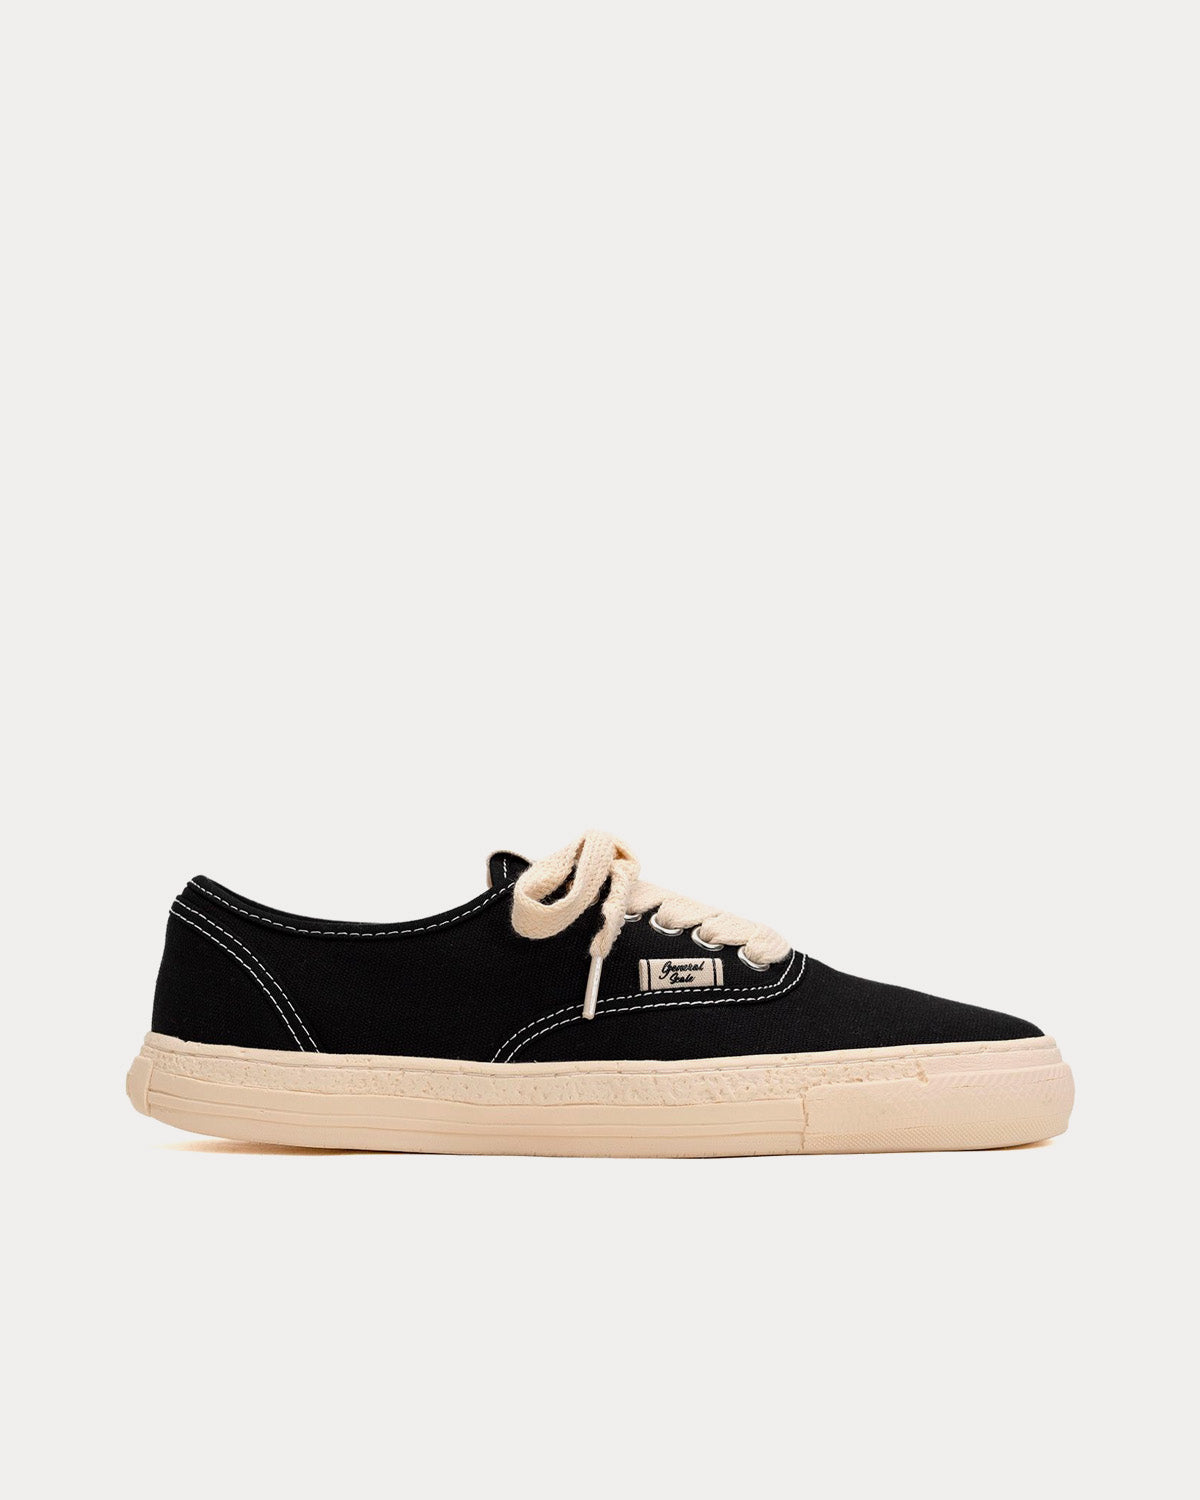 General Scale By Maison Mihara Yasuhiro - Past Sole 5 Canvas Black Low Top Sneakers